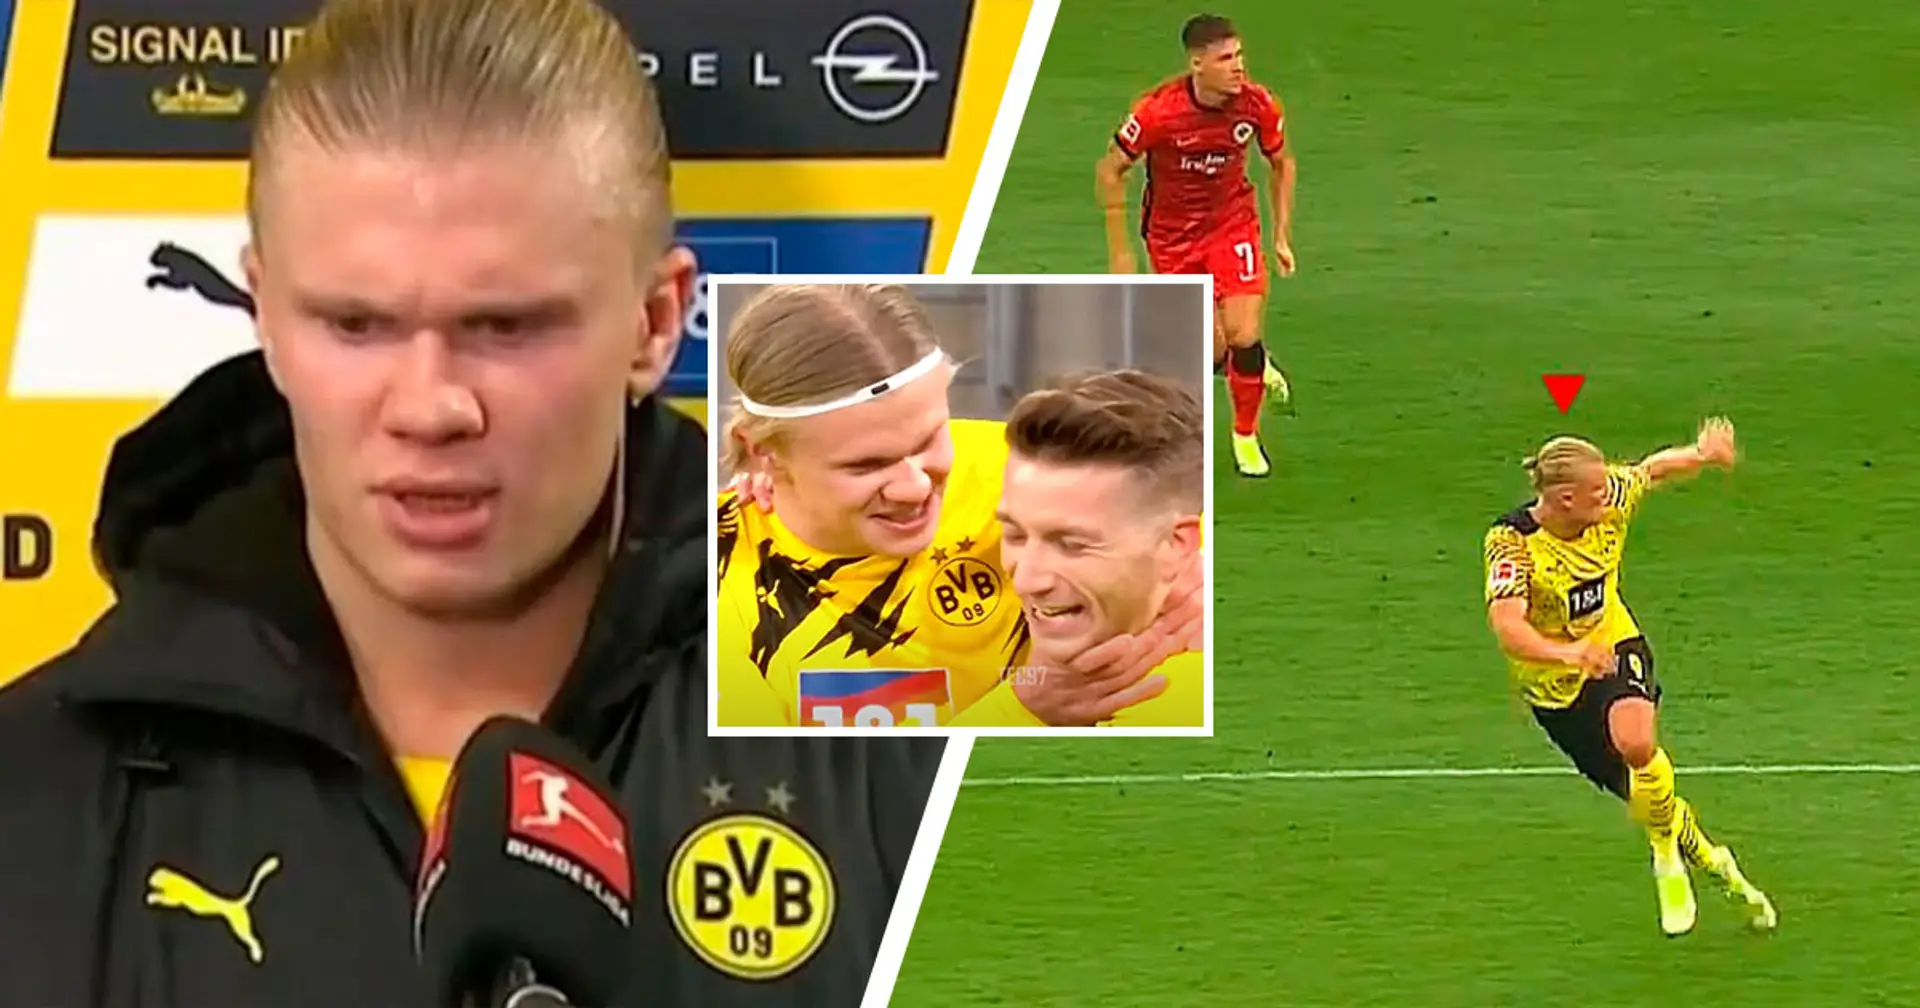 Haaland after last night's game: 'Dortmund pressuring me. I never spoke until now to respect them. Things will happen now'